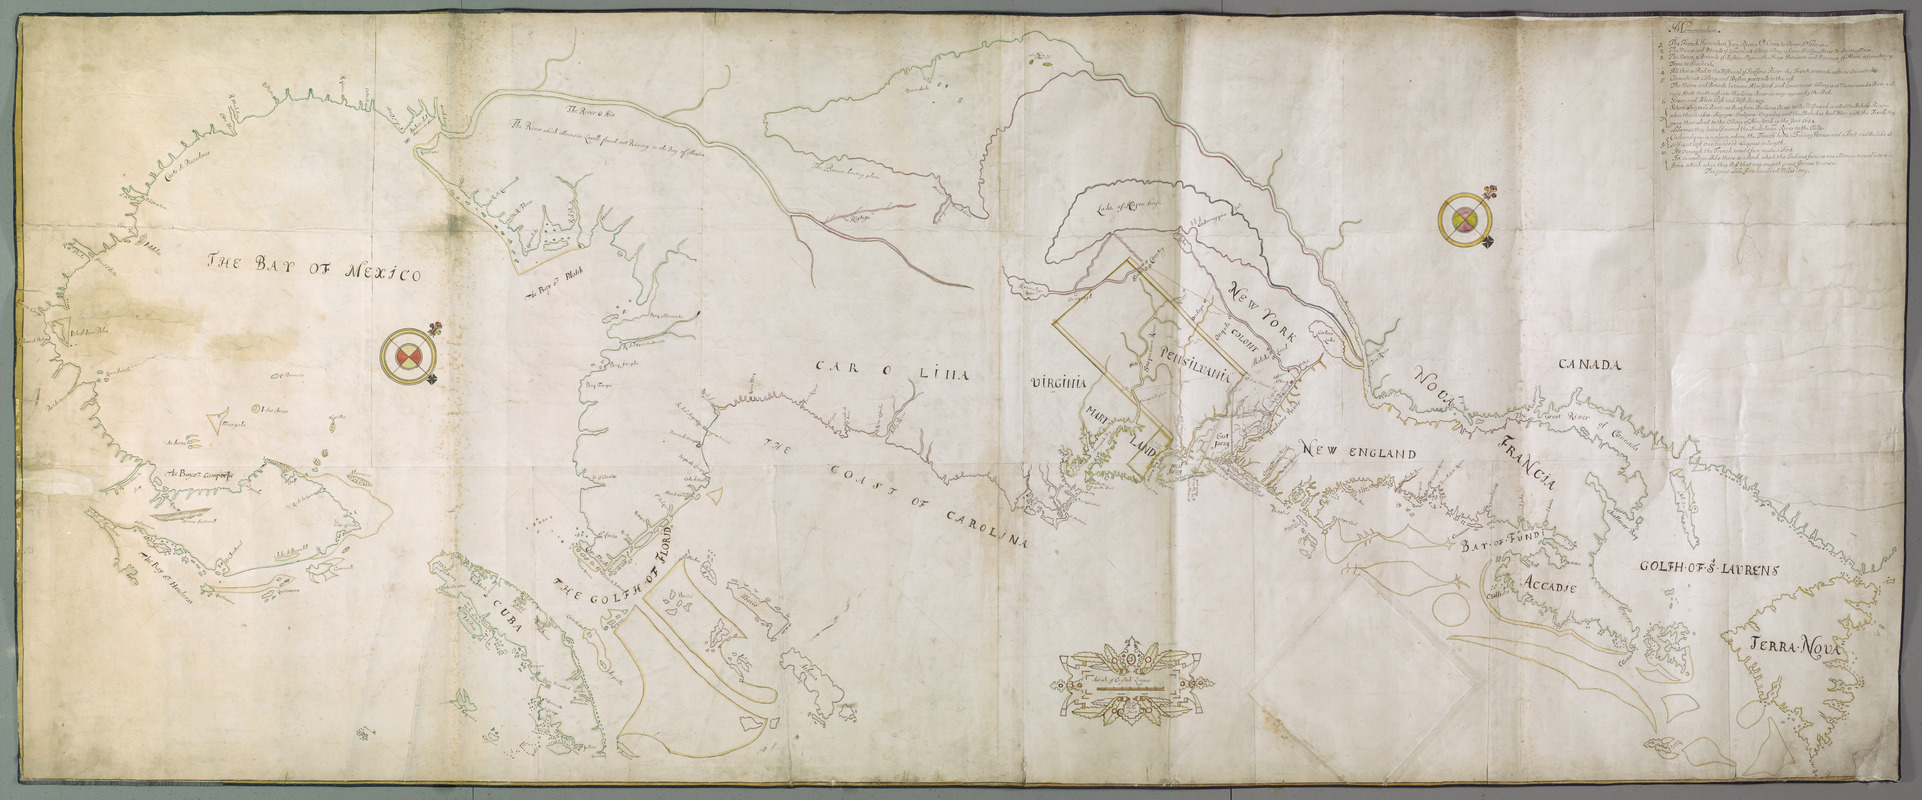 [A map of the east coast of America from Newfoundland to the Bay of Honduras]